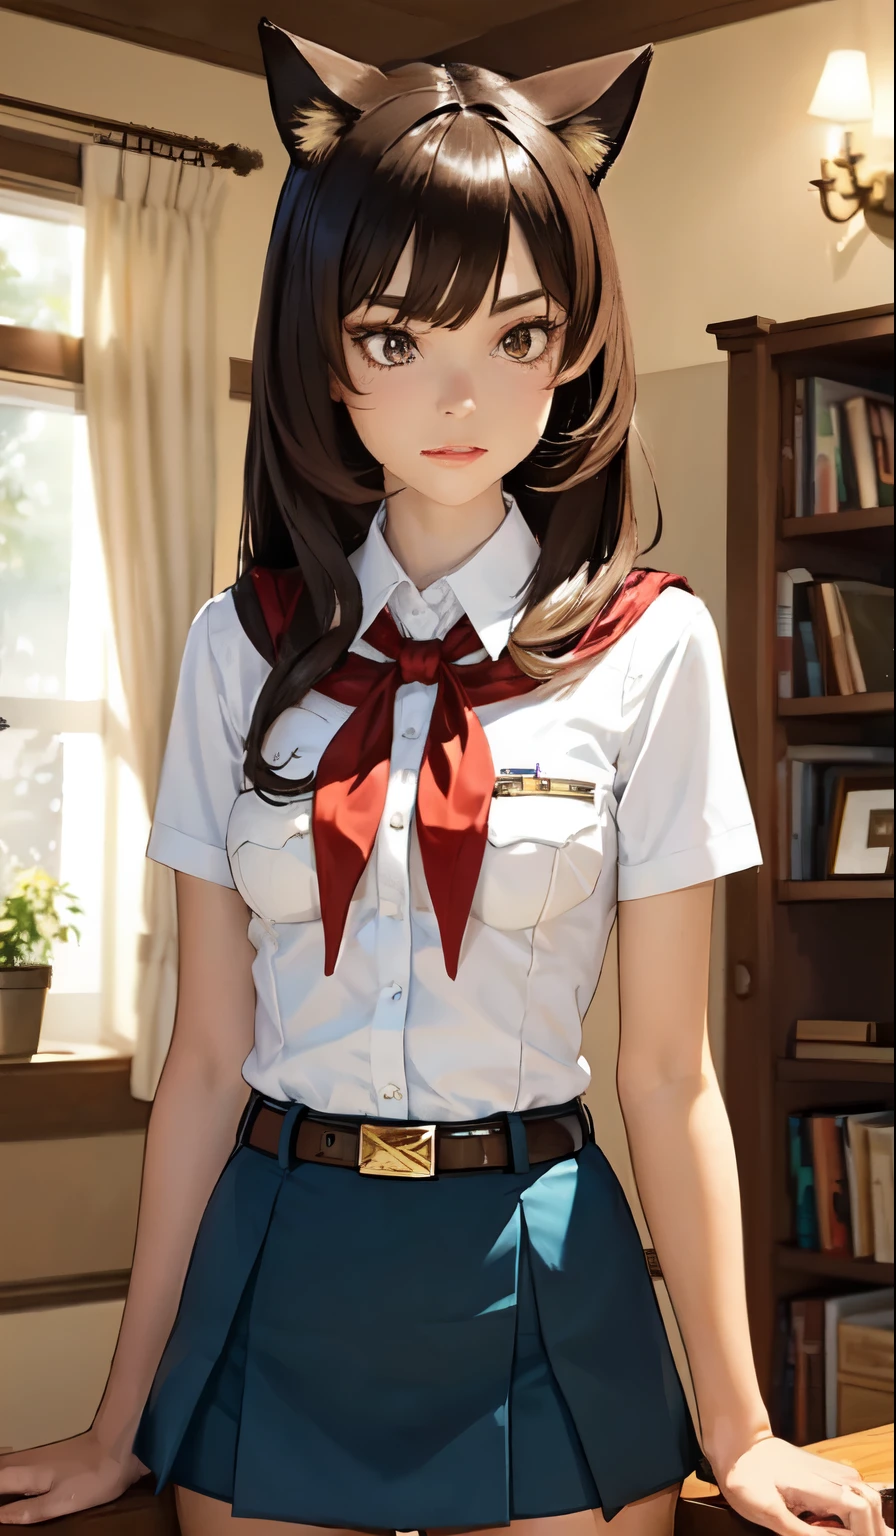 very young slim fit girl, full height, rounded face, very long disheveled dark brown hair, big brown eyes, shy smile, perfect flat breast, band on head with fake cat ears, sashagrey, pioneer neckerchief, short tight blue pleated skirt, bangs, tight white shirt, short sleeves, collared shirt, belt, red neckerchief, breast pocket